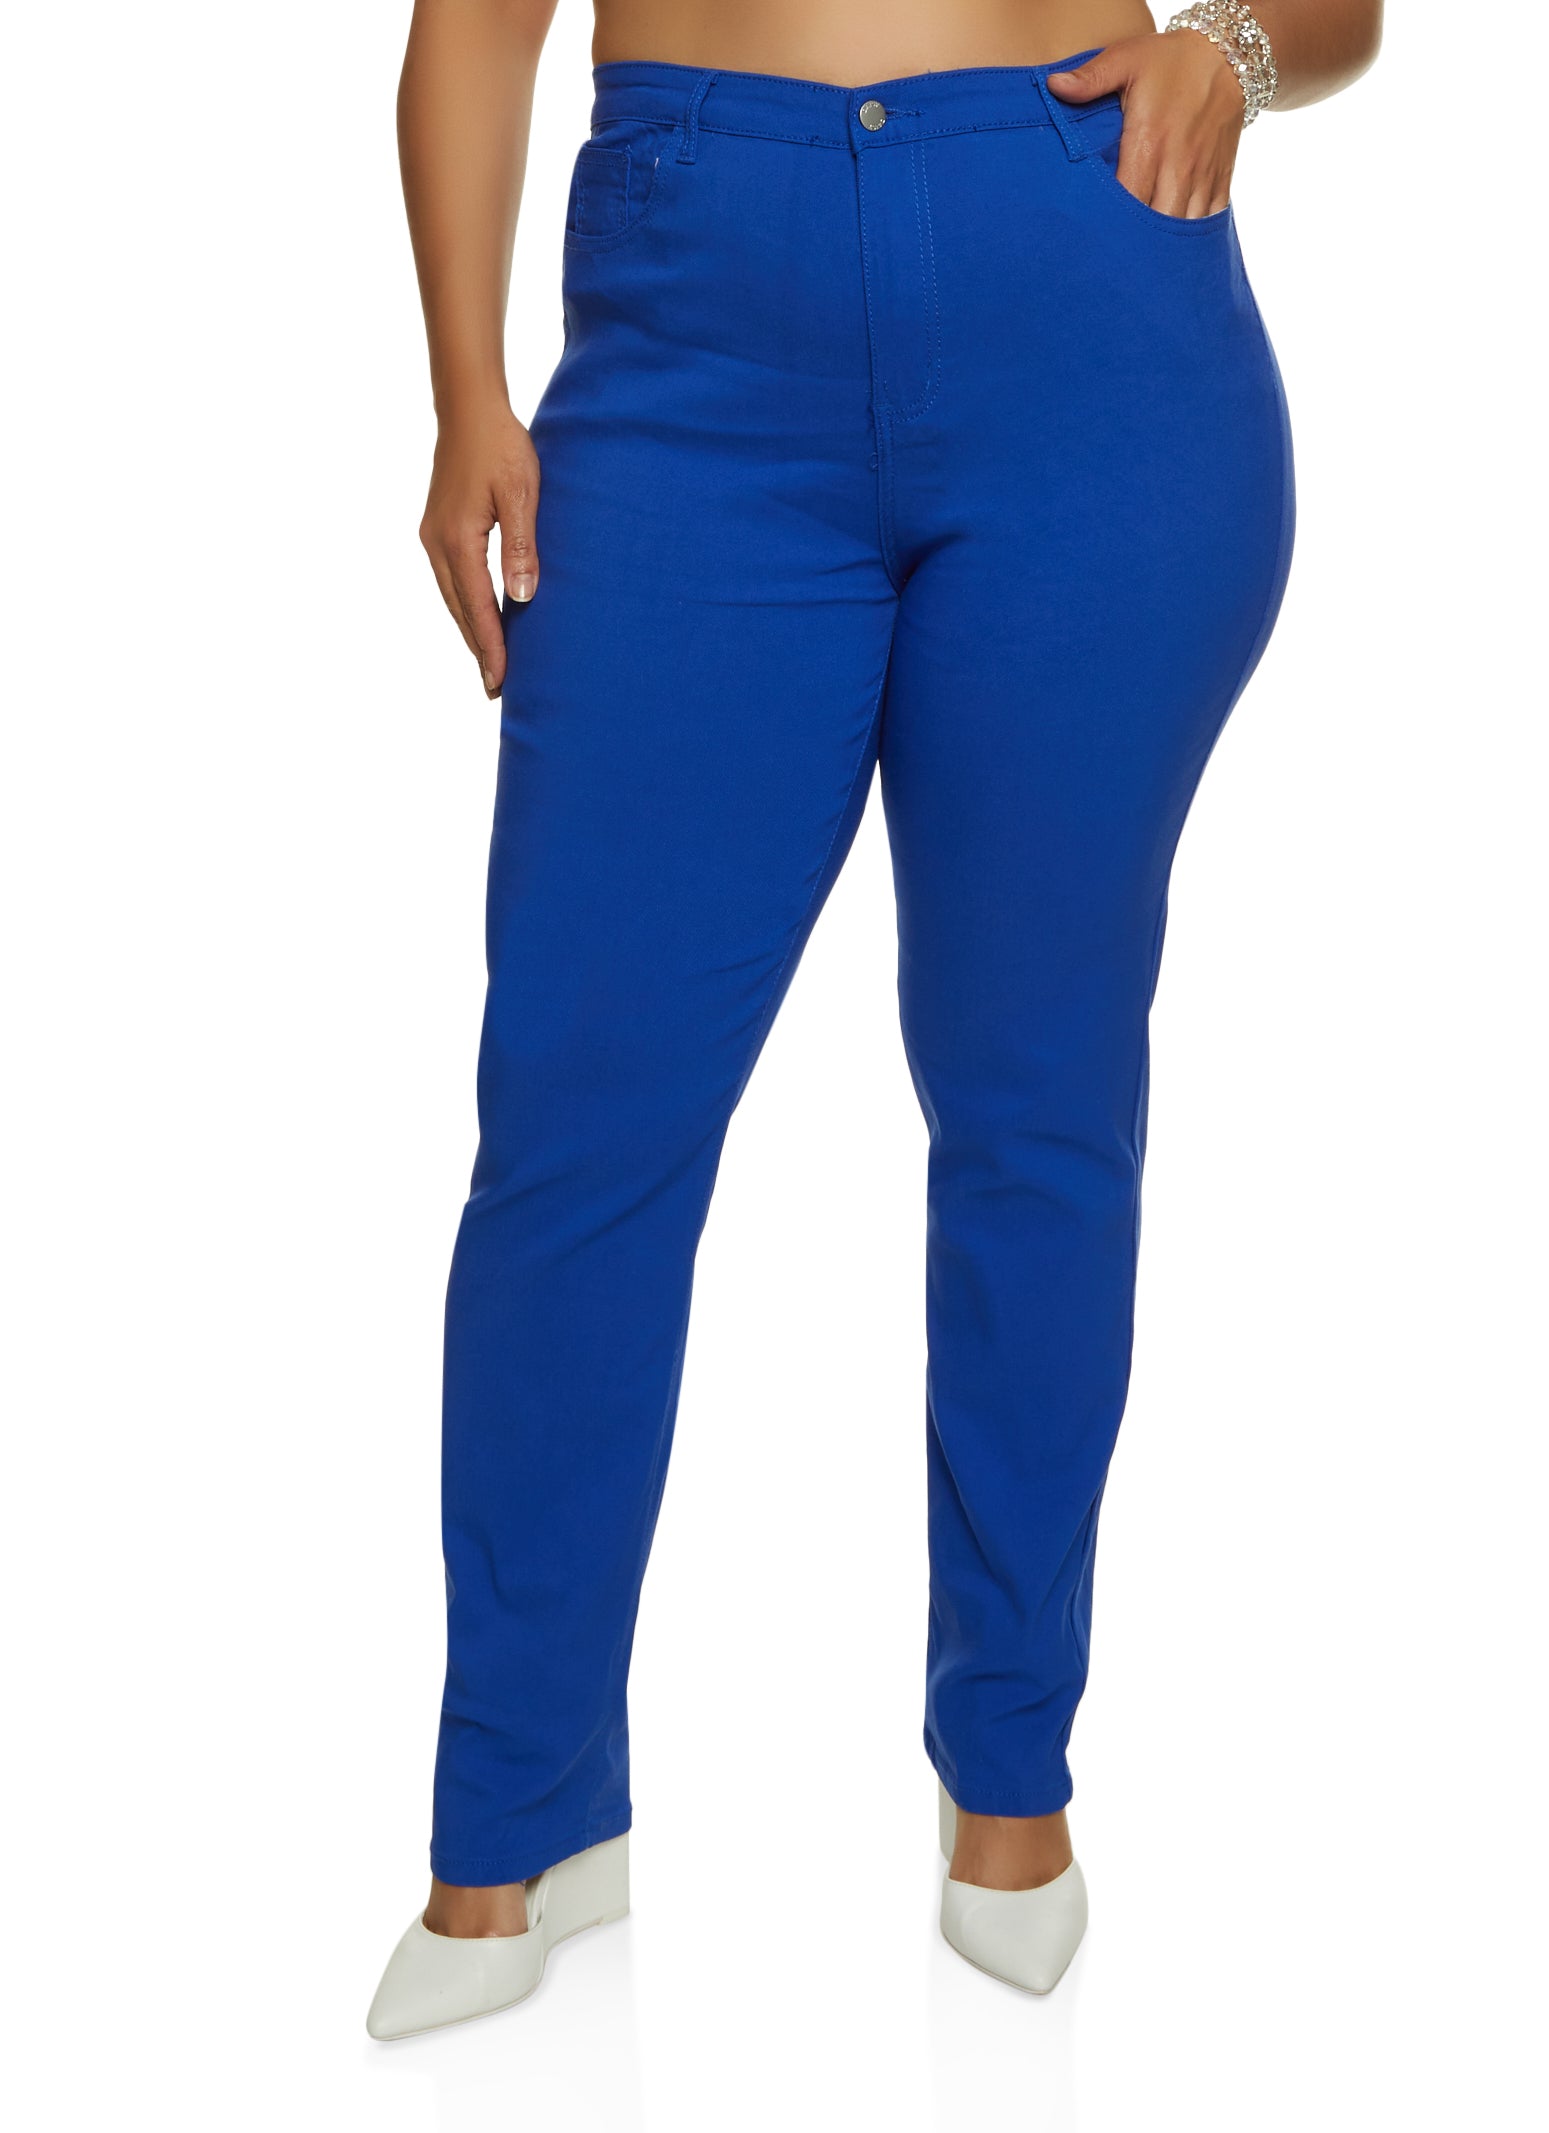 Casual Solid Skinny Royal Blue Plus Size Pants (Women's)